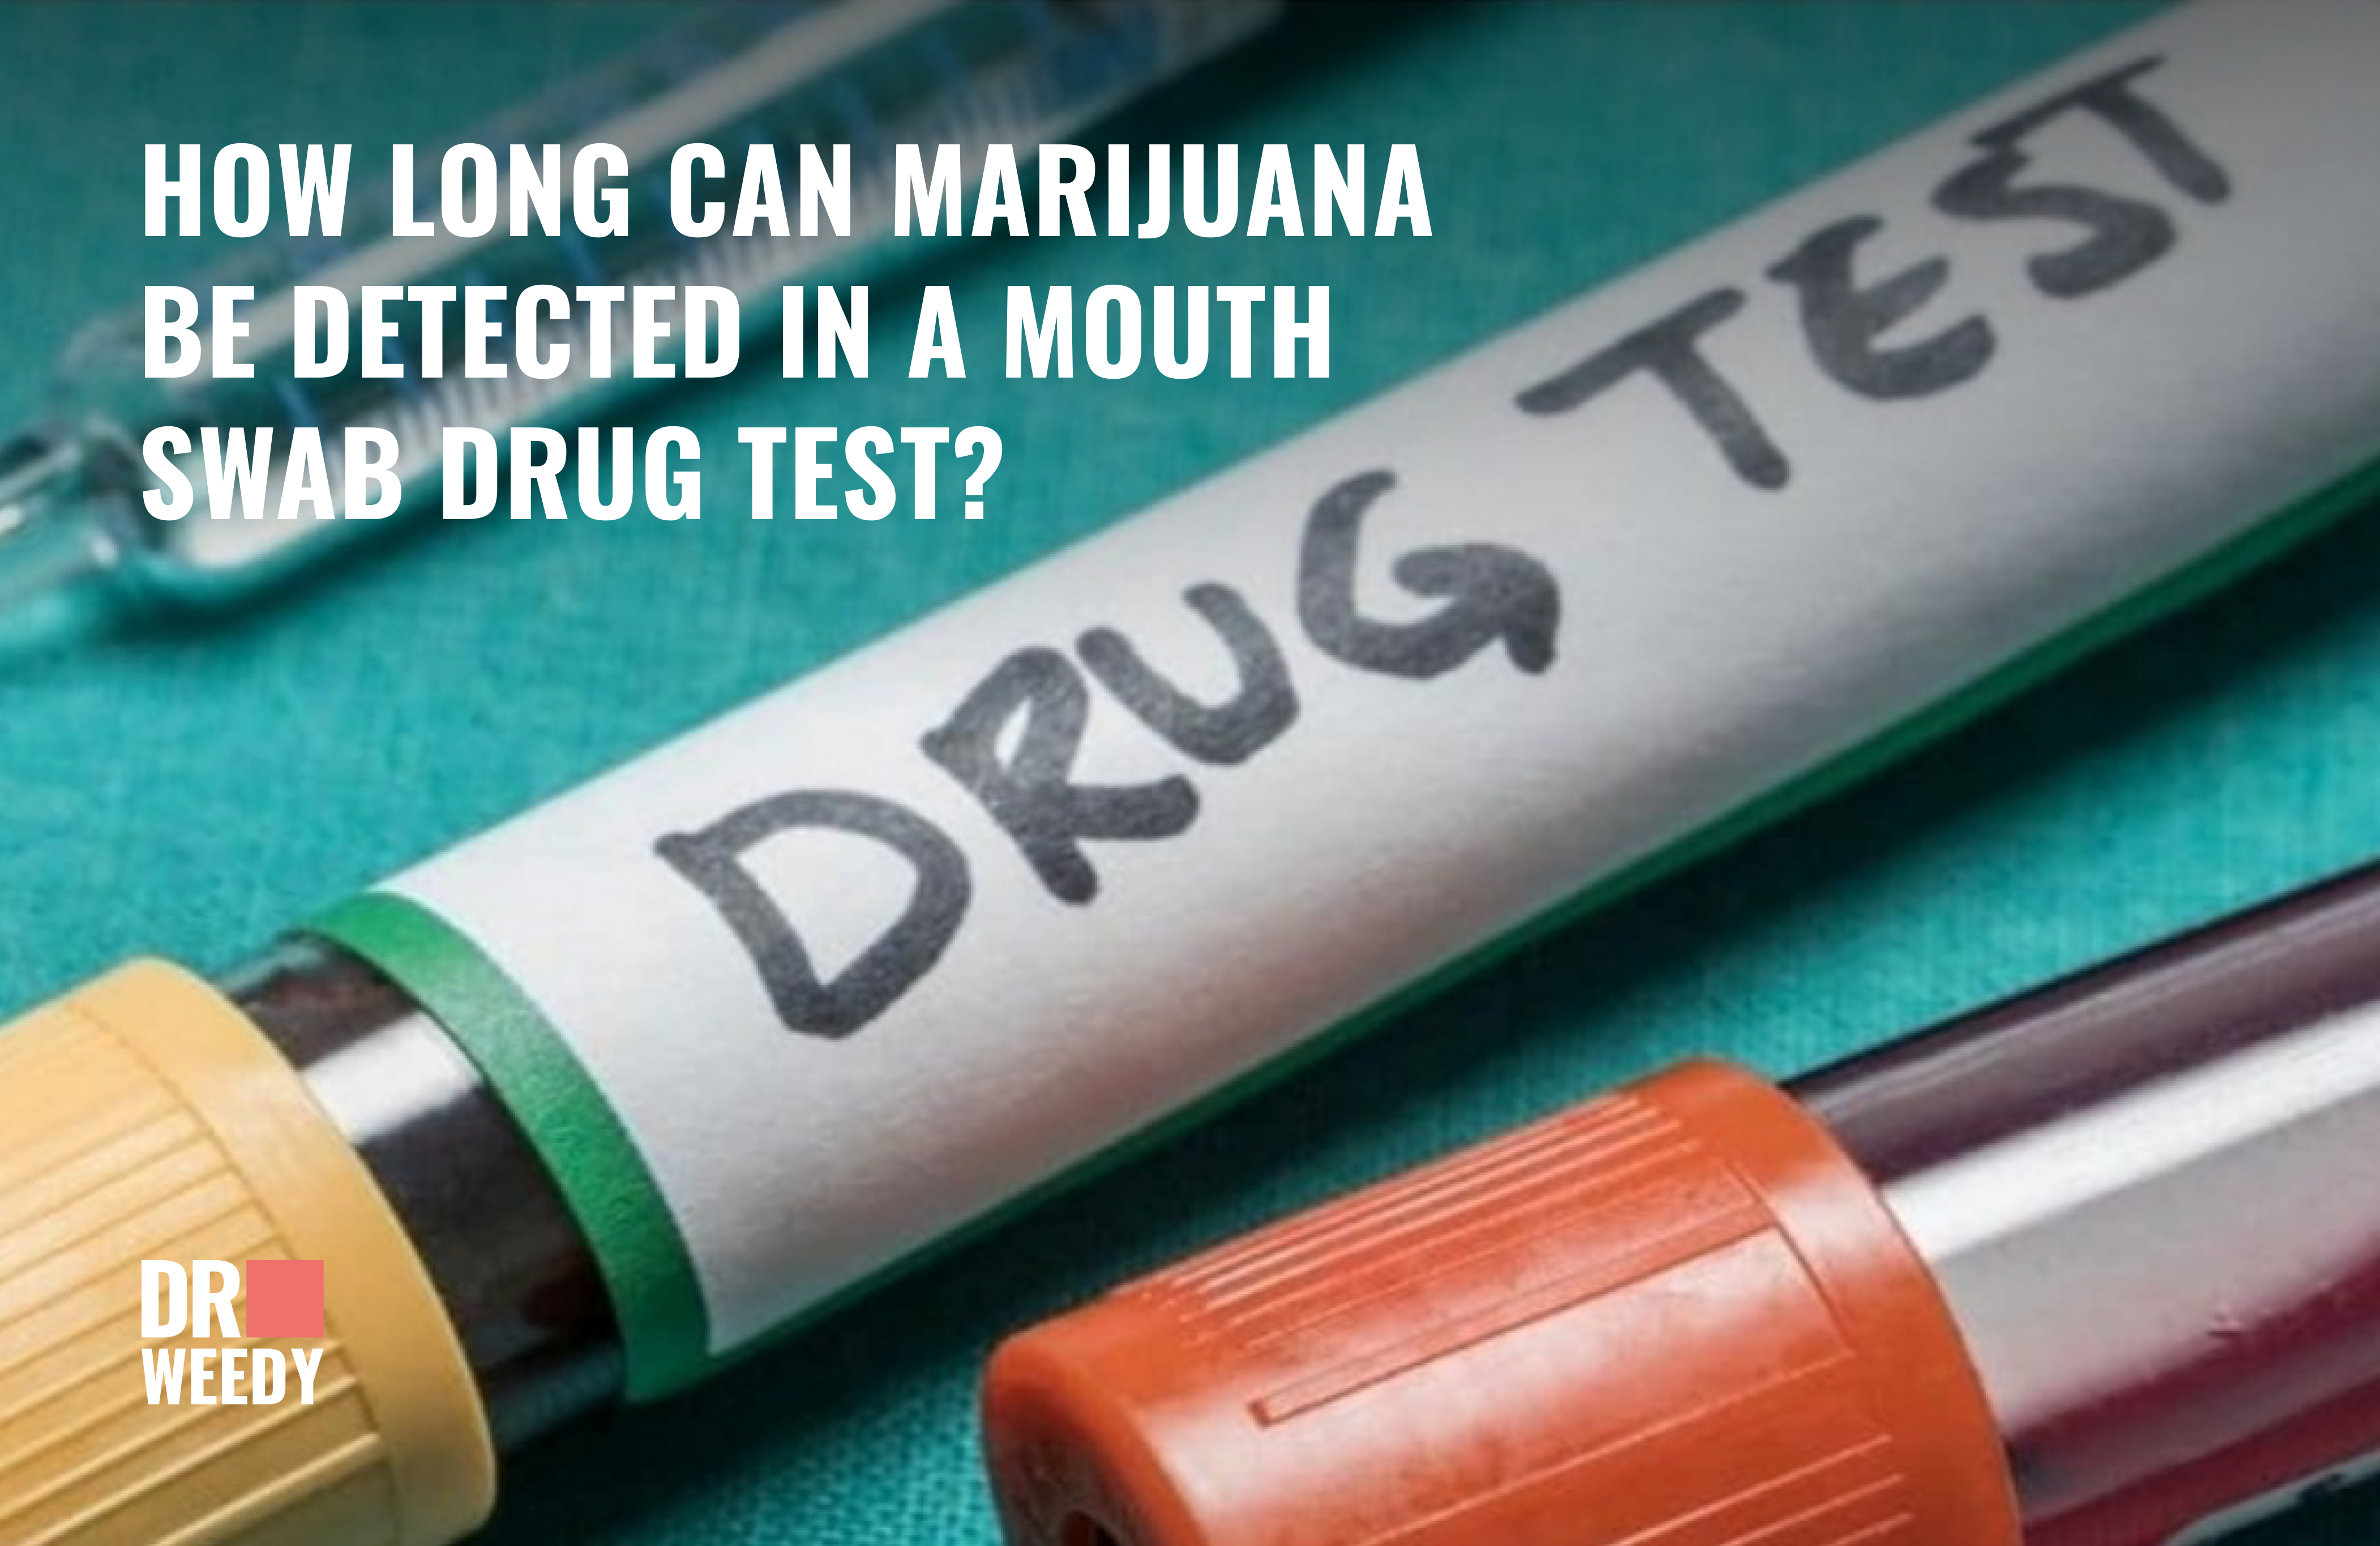 How Long Can Marijuana Be Detected in a Mouth Swab Drug Test?